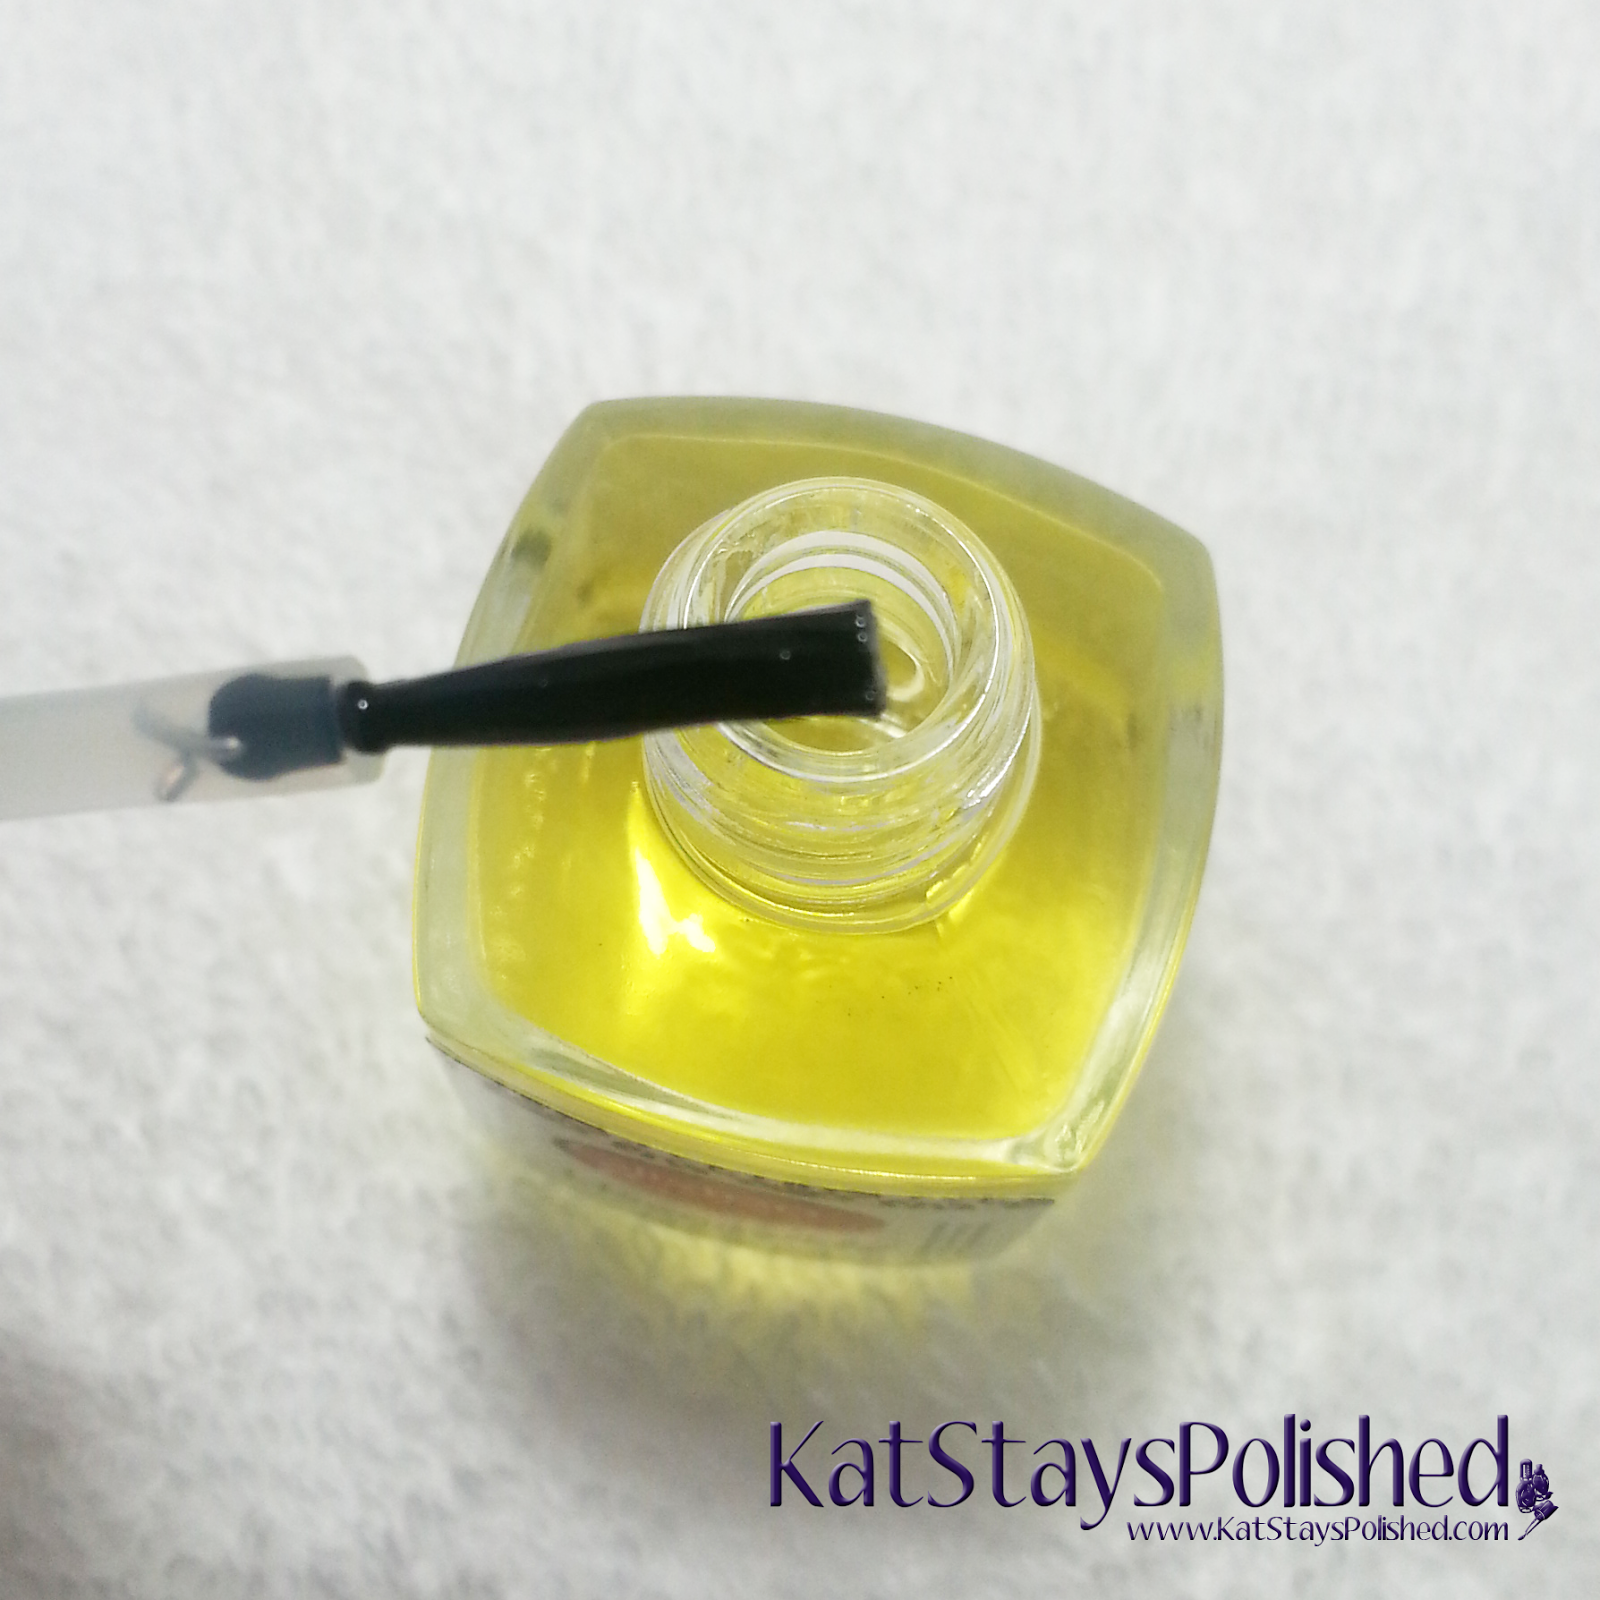 Glisten & Glow Cuticle Oil in Honeysuckle | May A Box, Indied by Llarowe | Kat Stays Polished